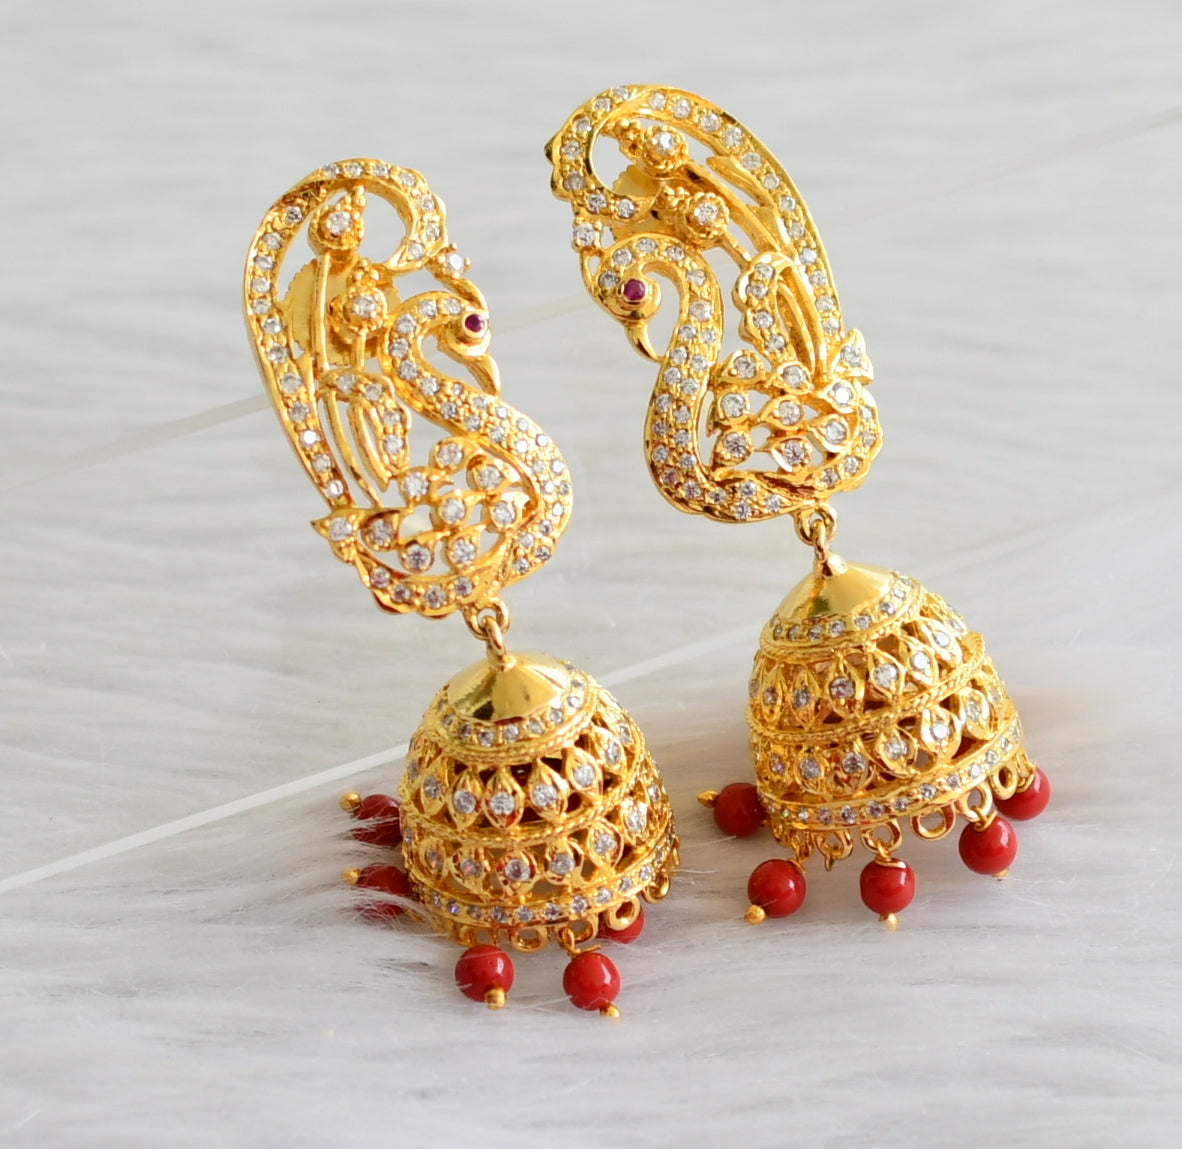 Gold tone coral beaded cz white peacock necklace set dj-44449